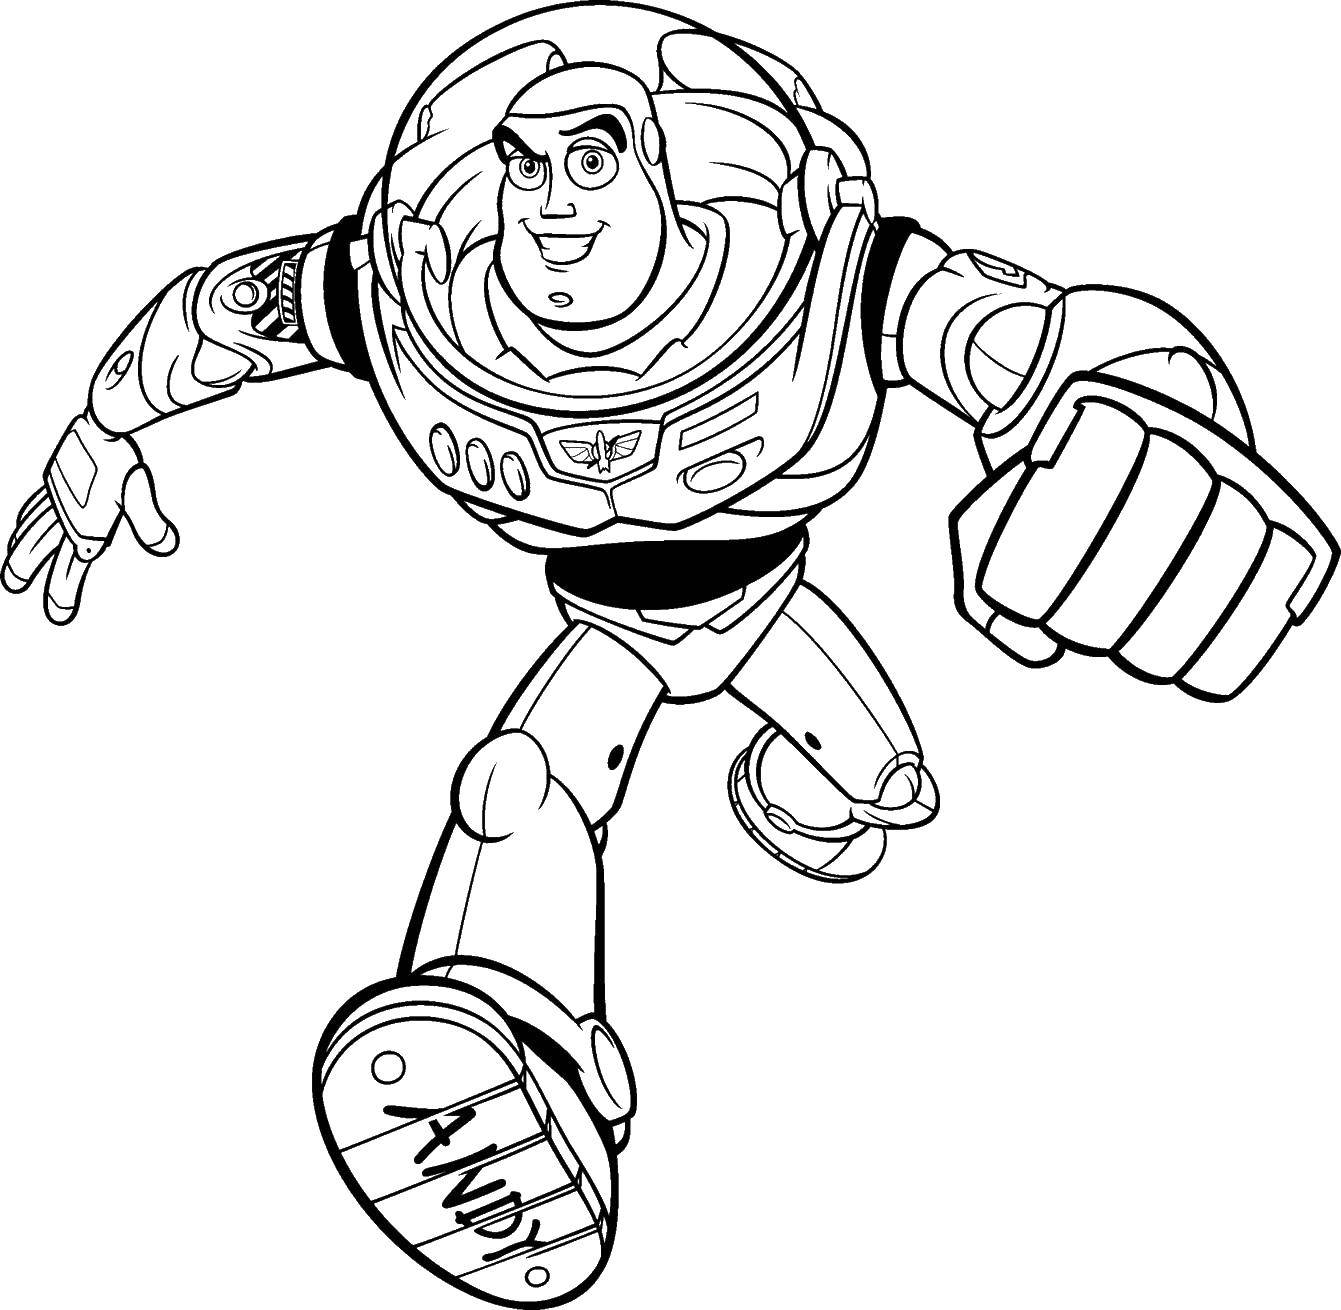 Coloring Buzz Lightyear. Category toy story. Tags:  Buzz Lightyear, toys.